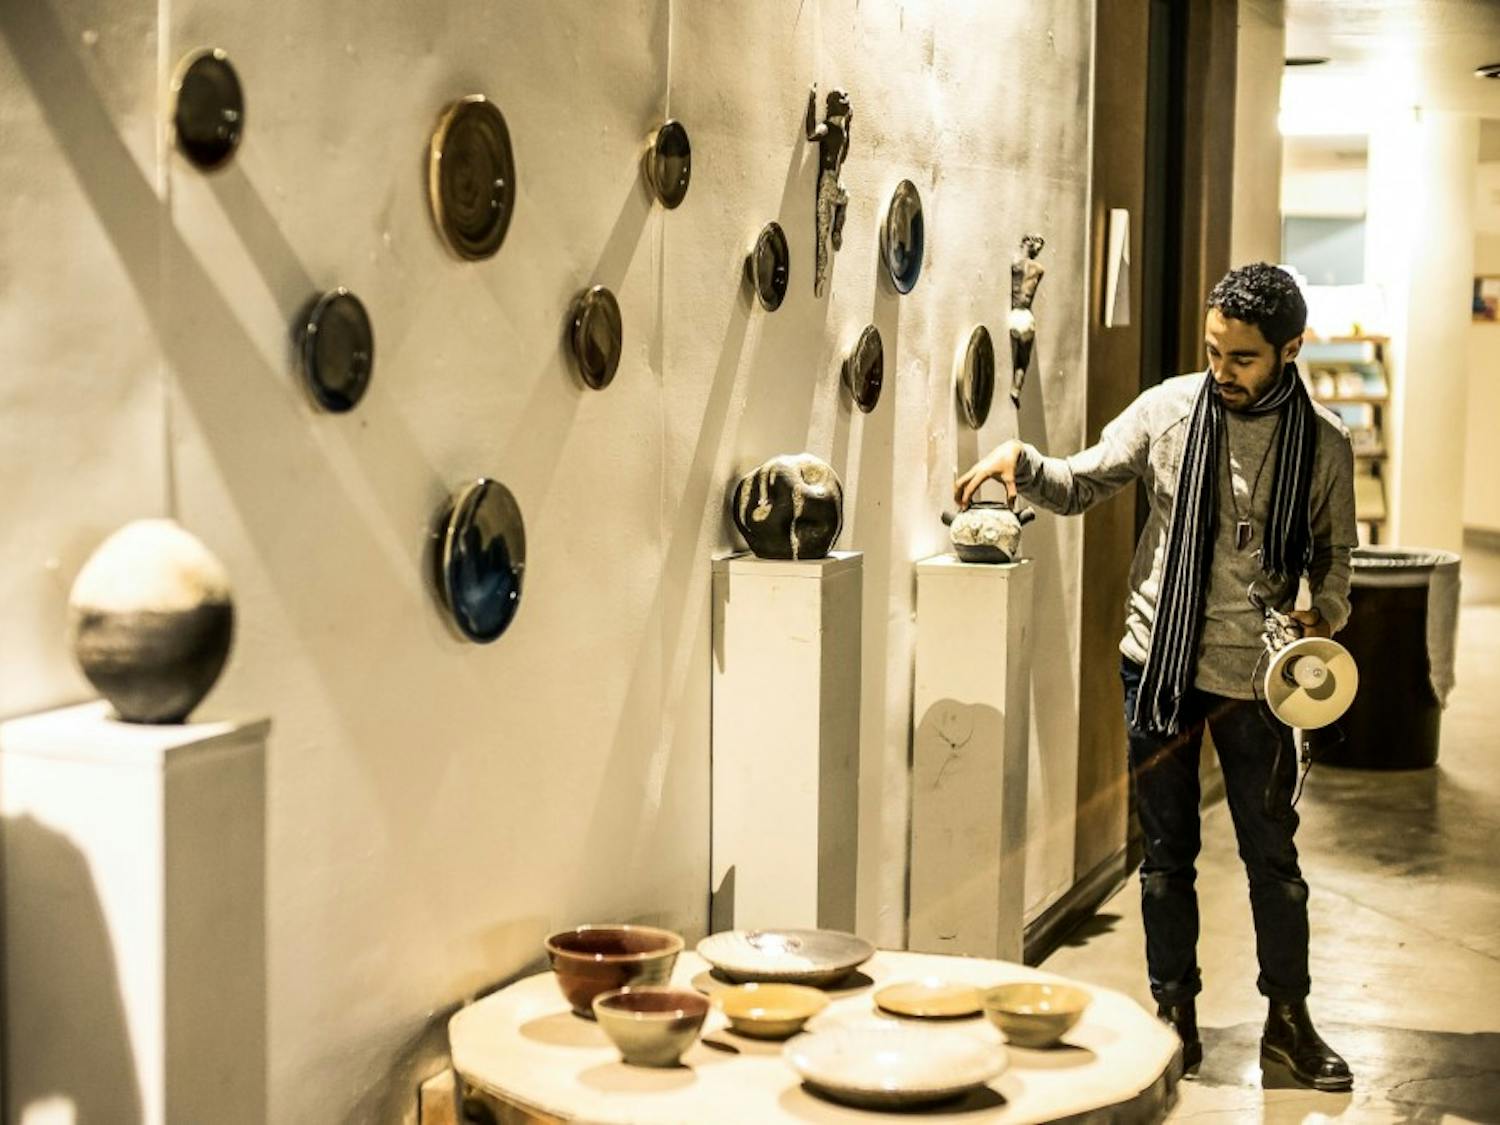 Miguel Lastra adjusts a piece of Raku-fired figural sculptures and Rake gas reduction fired functional vessels on the wall as part of a collaborative art gallery titled “Figure Function Time.”